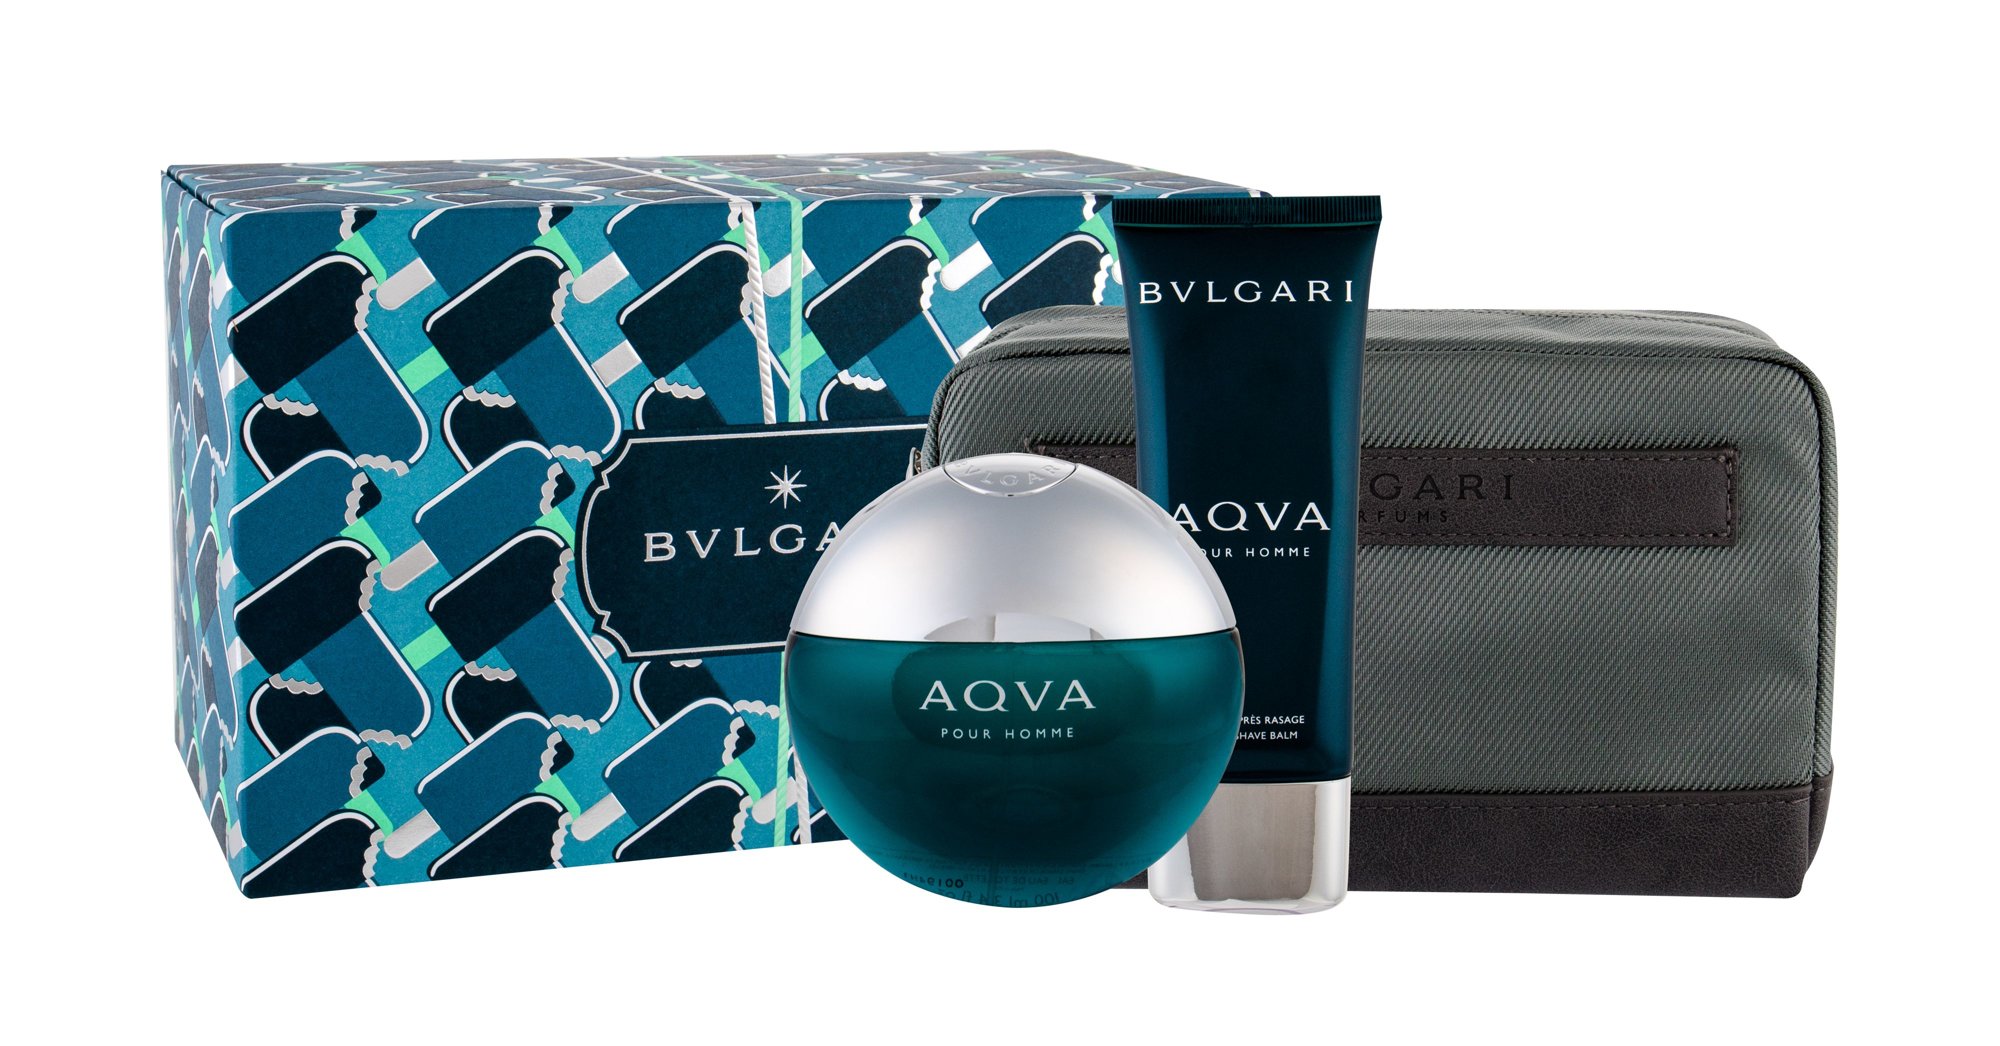 Bvlgari Aqva Pour Homme 100ml Edt 100 ml + Aftershave Balm 100 ml + Cosmetic Bag Kvepalai Vyrams EDT Rinkinys